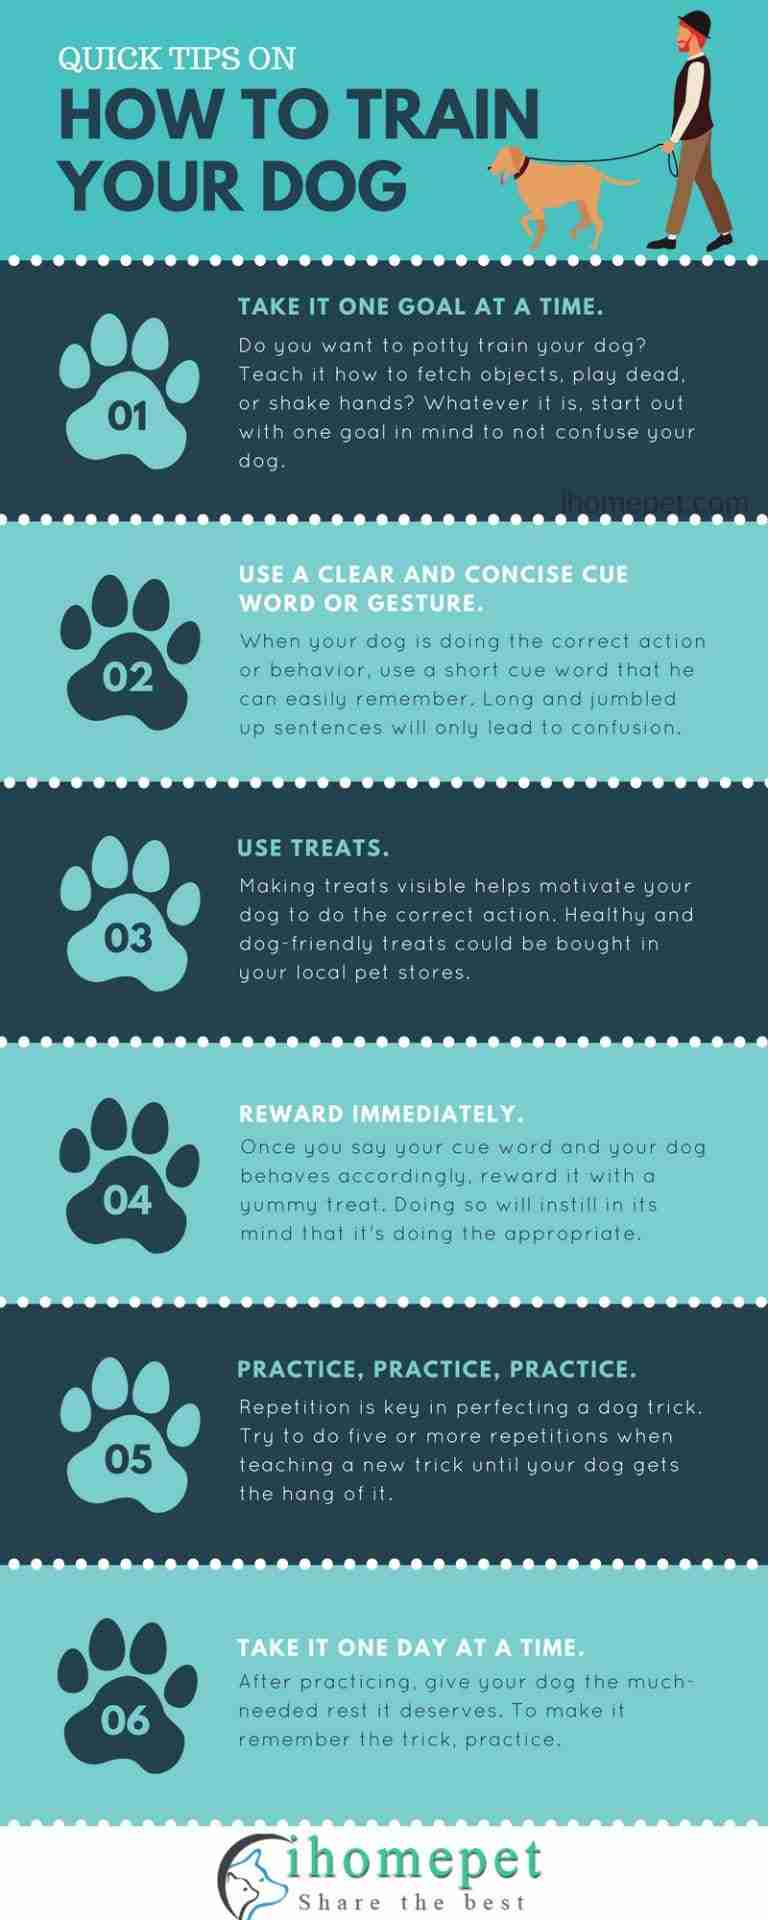 HOW-TO-TRAIN-YOUR-DOG01-768x1920.jpg